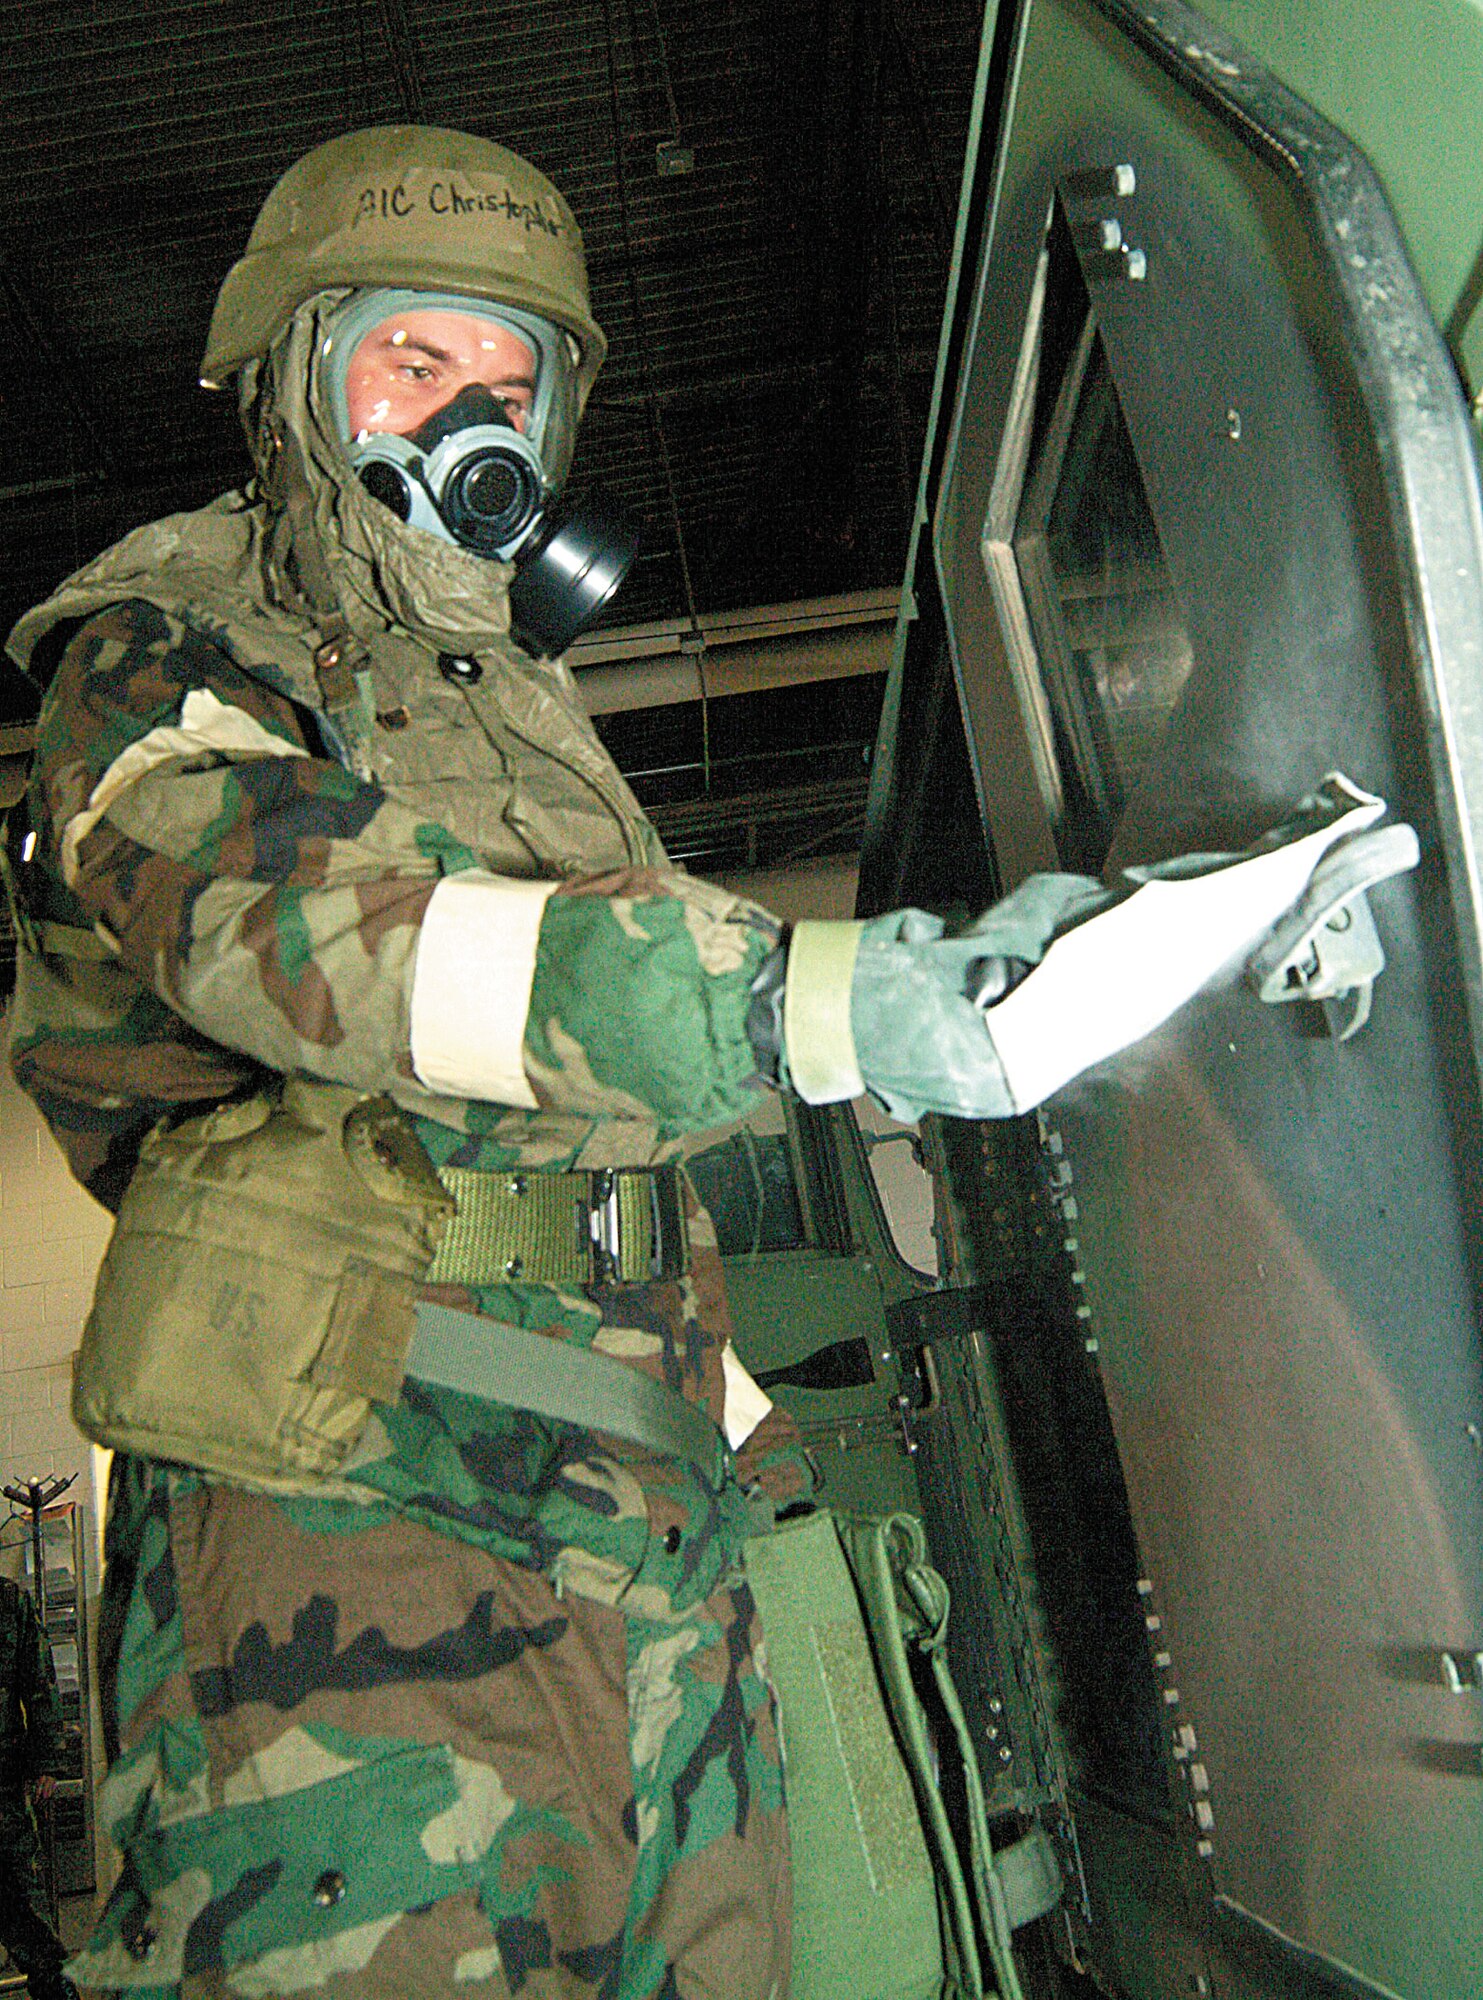 WHITEMAN AFB, Mo. -- Senior Airman Christopher Brockway, 442nd Logistics Readiness Squadron vehicle operations, decontaminates a vehicle door handle for a decontamination training exercise during the February 2006 Unit Training Assembly. The 442nd LRS is part of the 442nd Fighter Wing, an Air Force Reserve unit based at Whiteman Air Force Base, Mo. (Photo by Master Sgt. Bill Huntington)